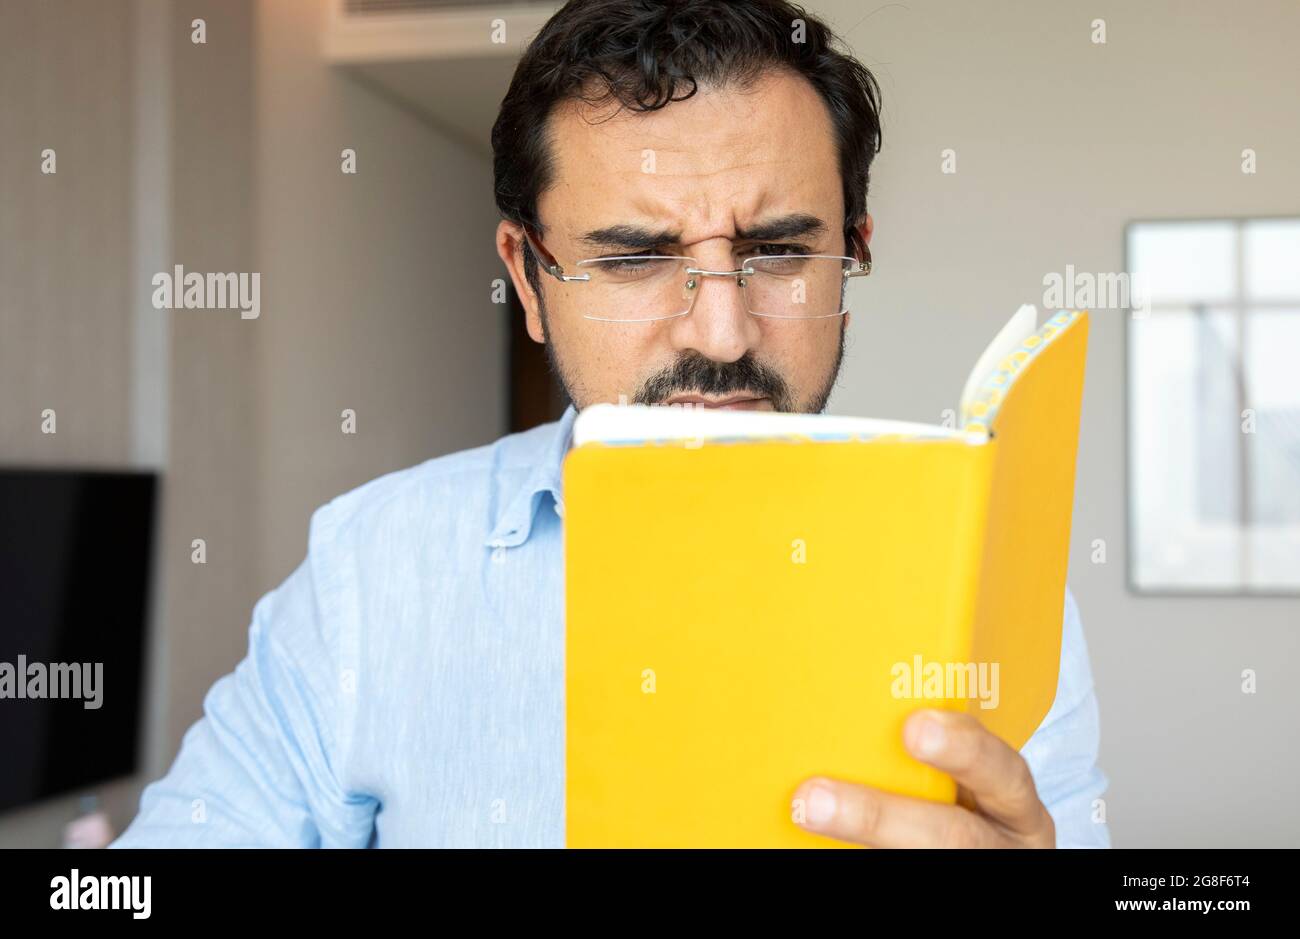 middle aged man with poor eyesight trying to read notes Stock Photo